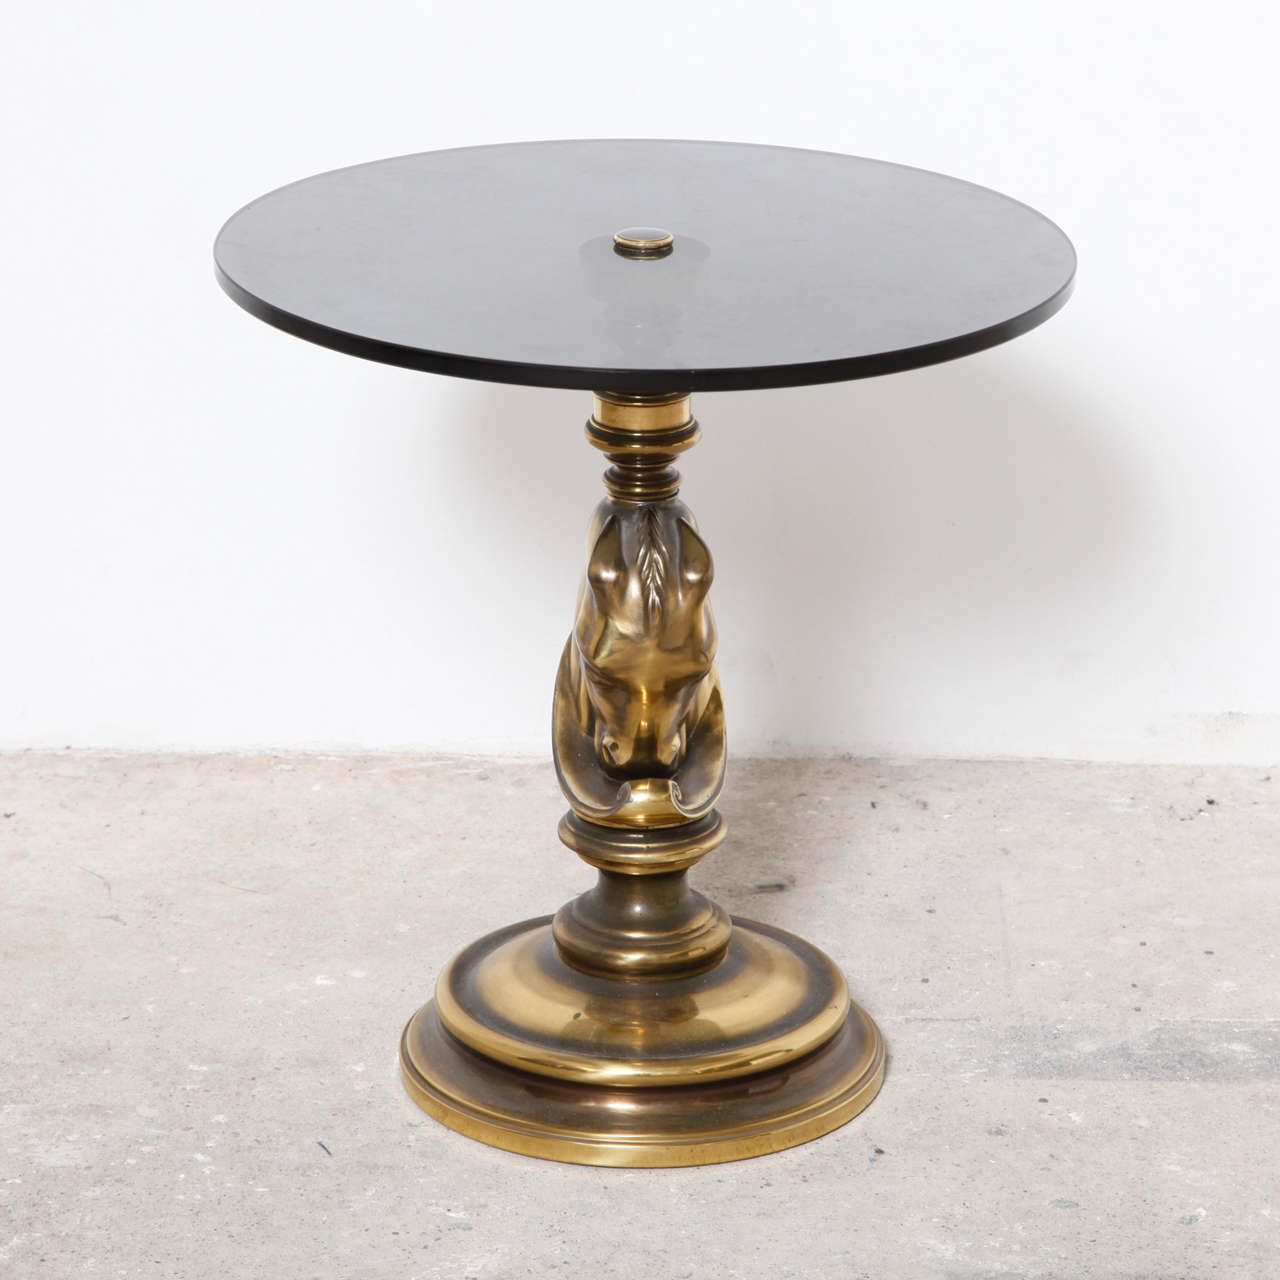 French side table, bronze horse head, smoked glass top.